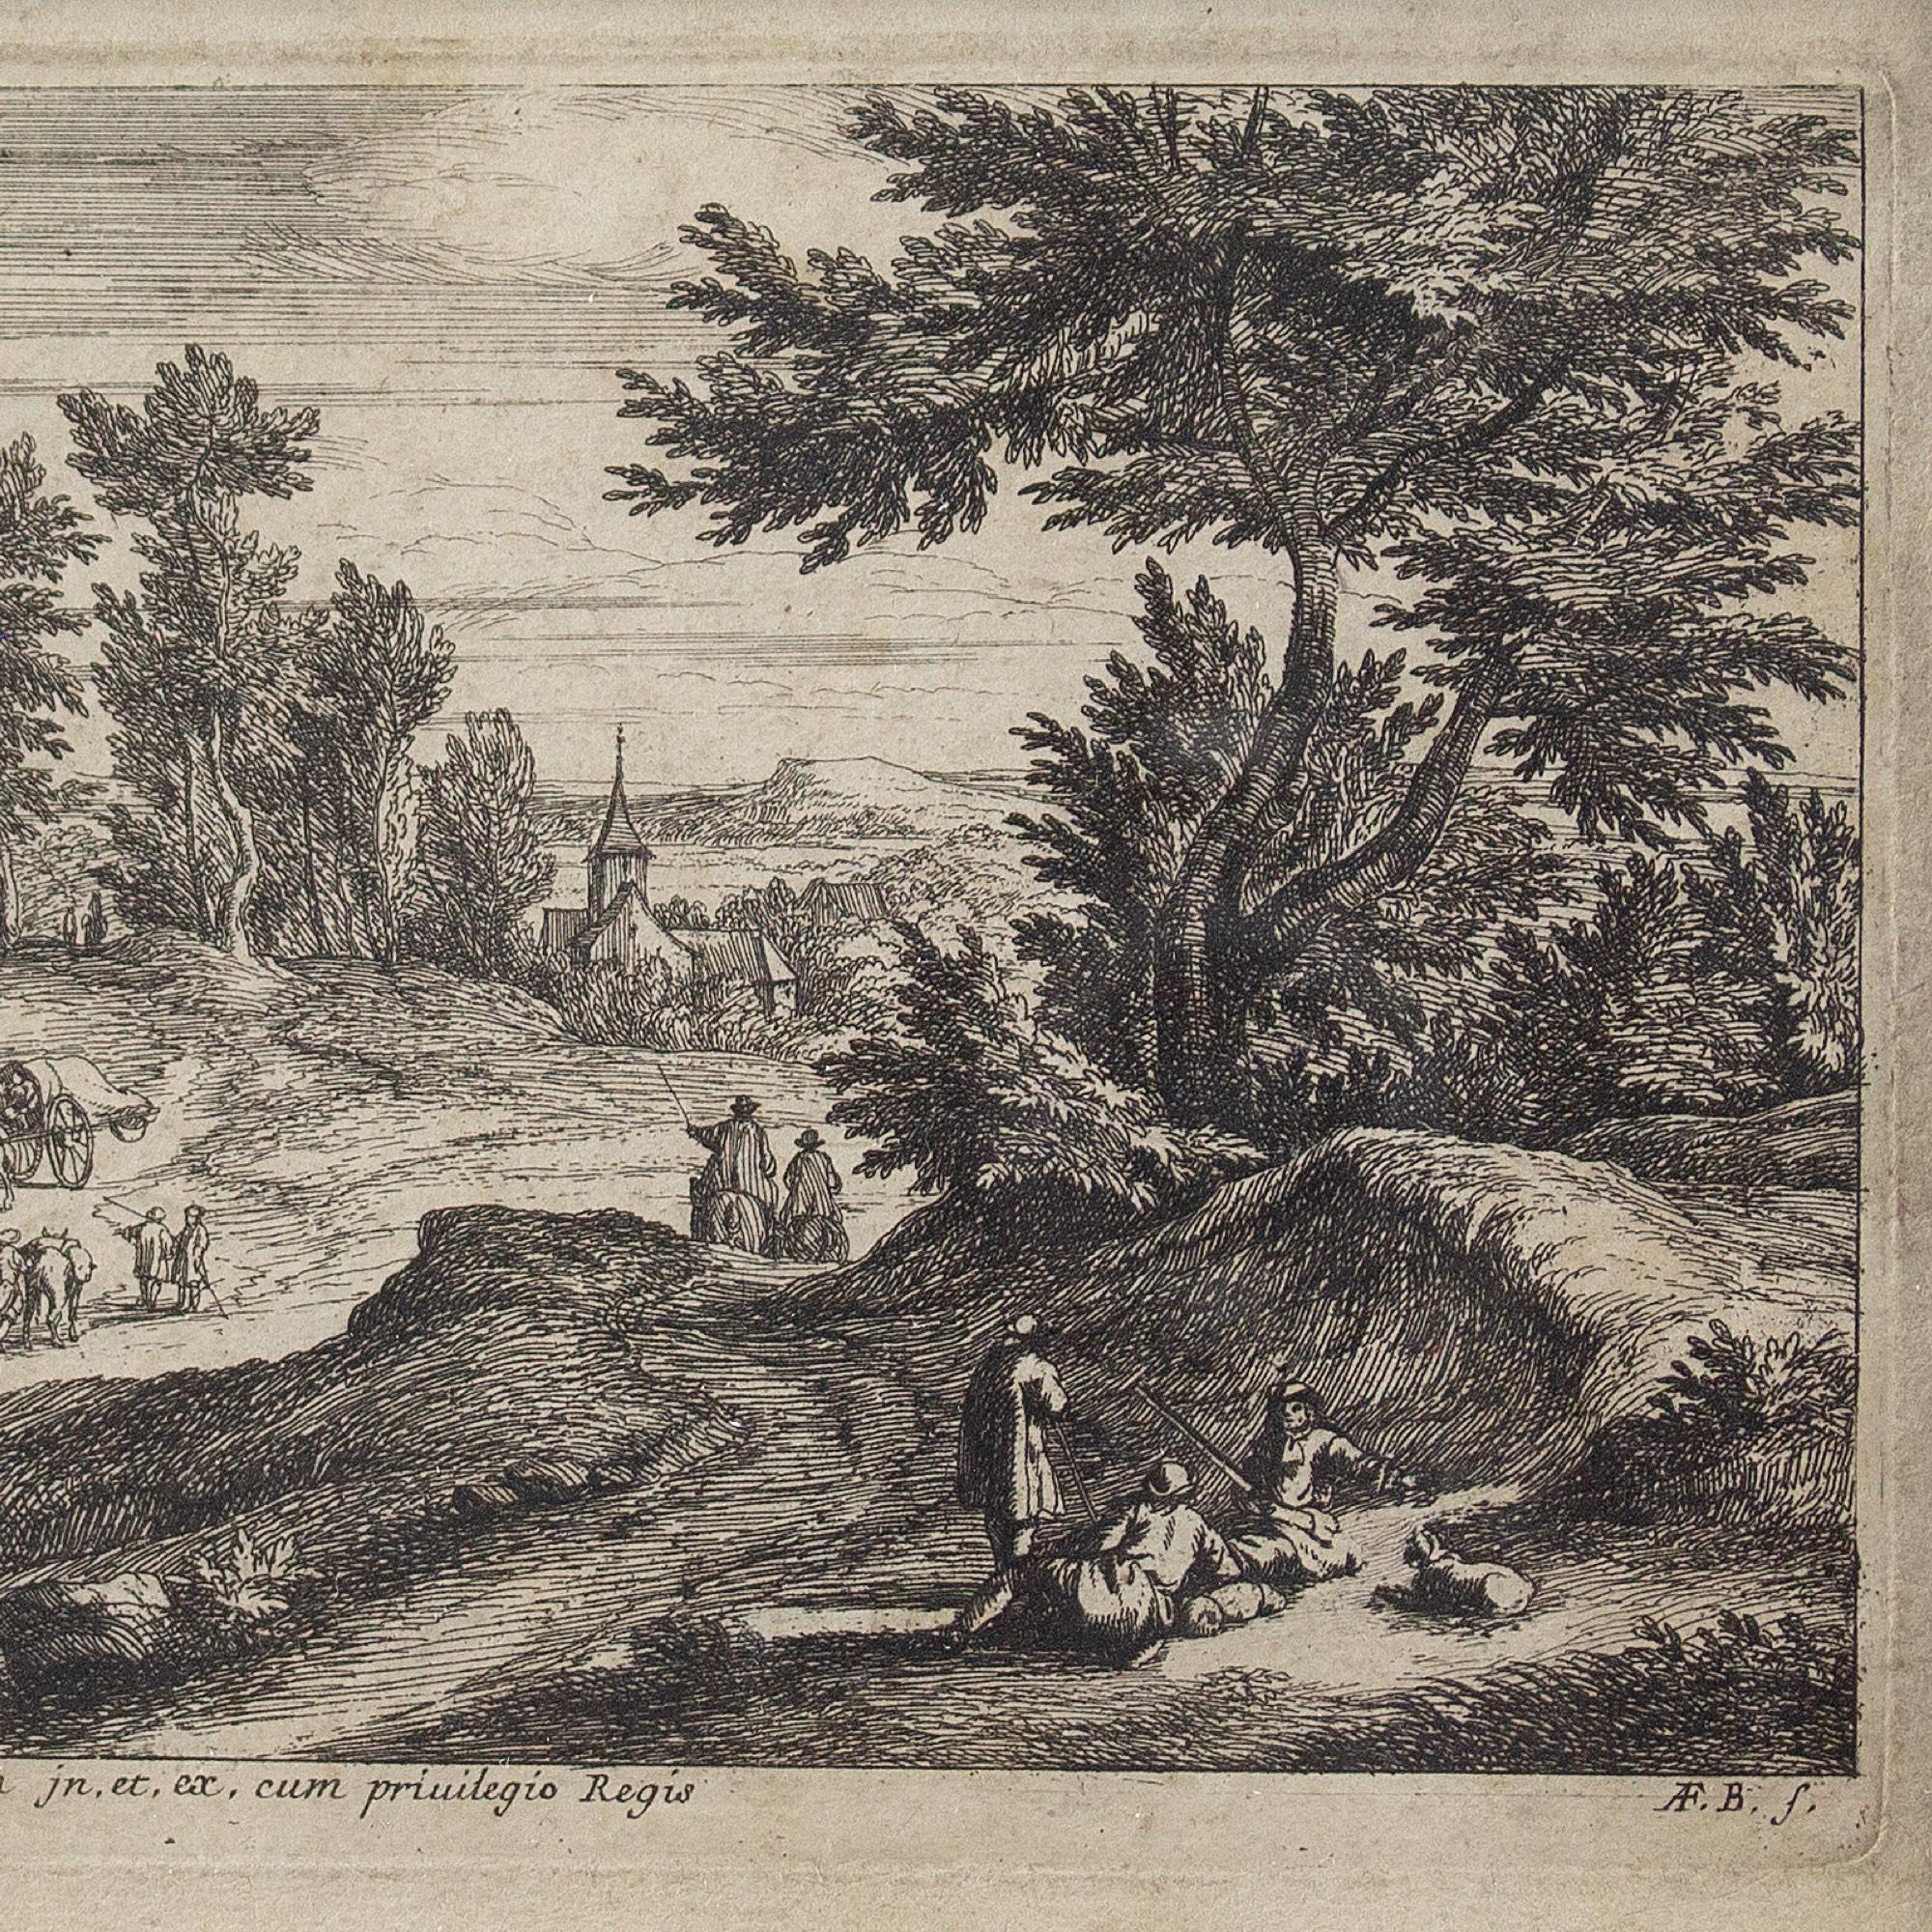 This 17th-century engraving by Flemish draughtsman Adriaen Frans Boudewyns (1644-1719) is after a painting by Adam-François van der Meulen (1632-1690). It depicts the French calvary of Louis XIV resting unscathed following another military